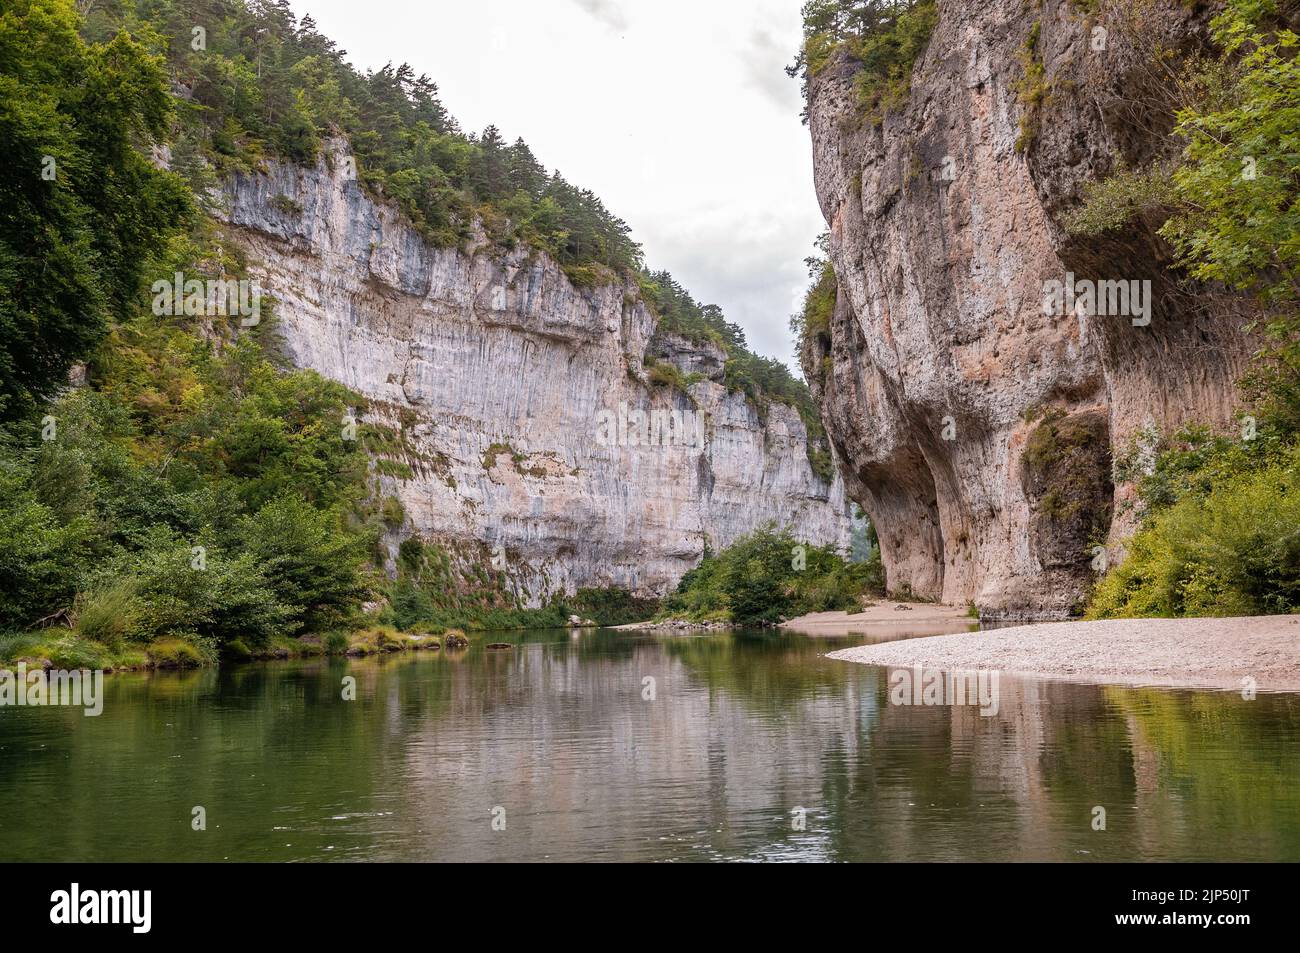 Cliffs in the Gorges du Tarn, Lozere, France Stock Photo